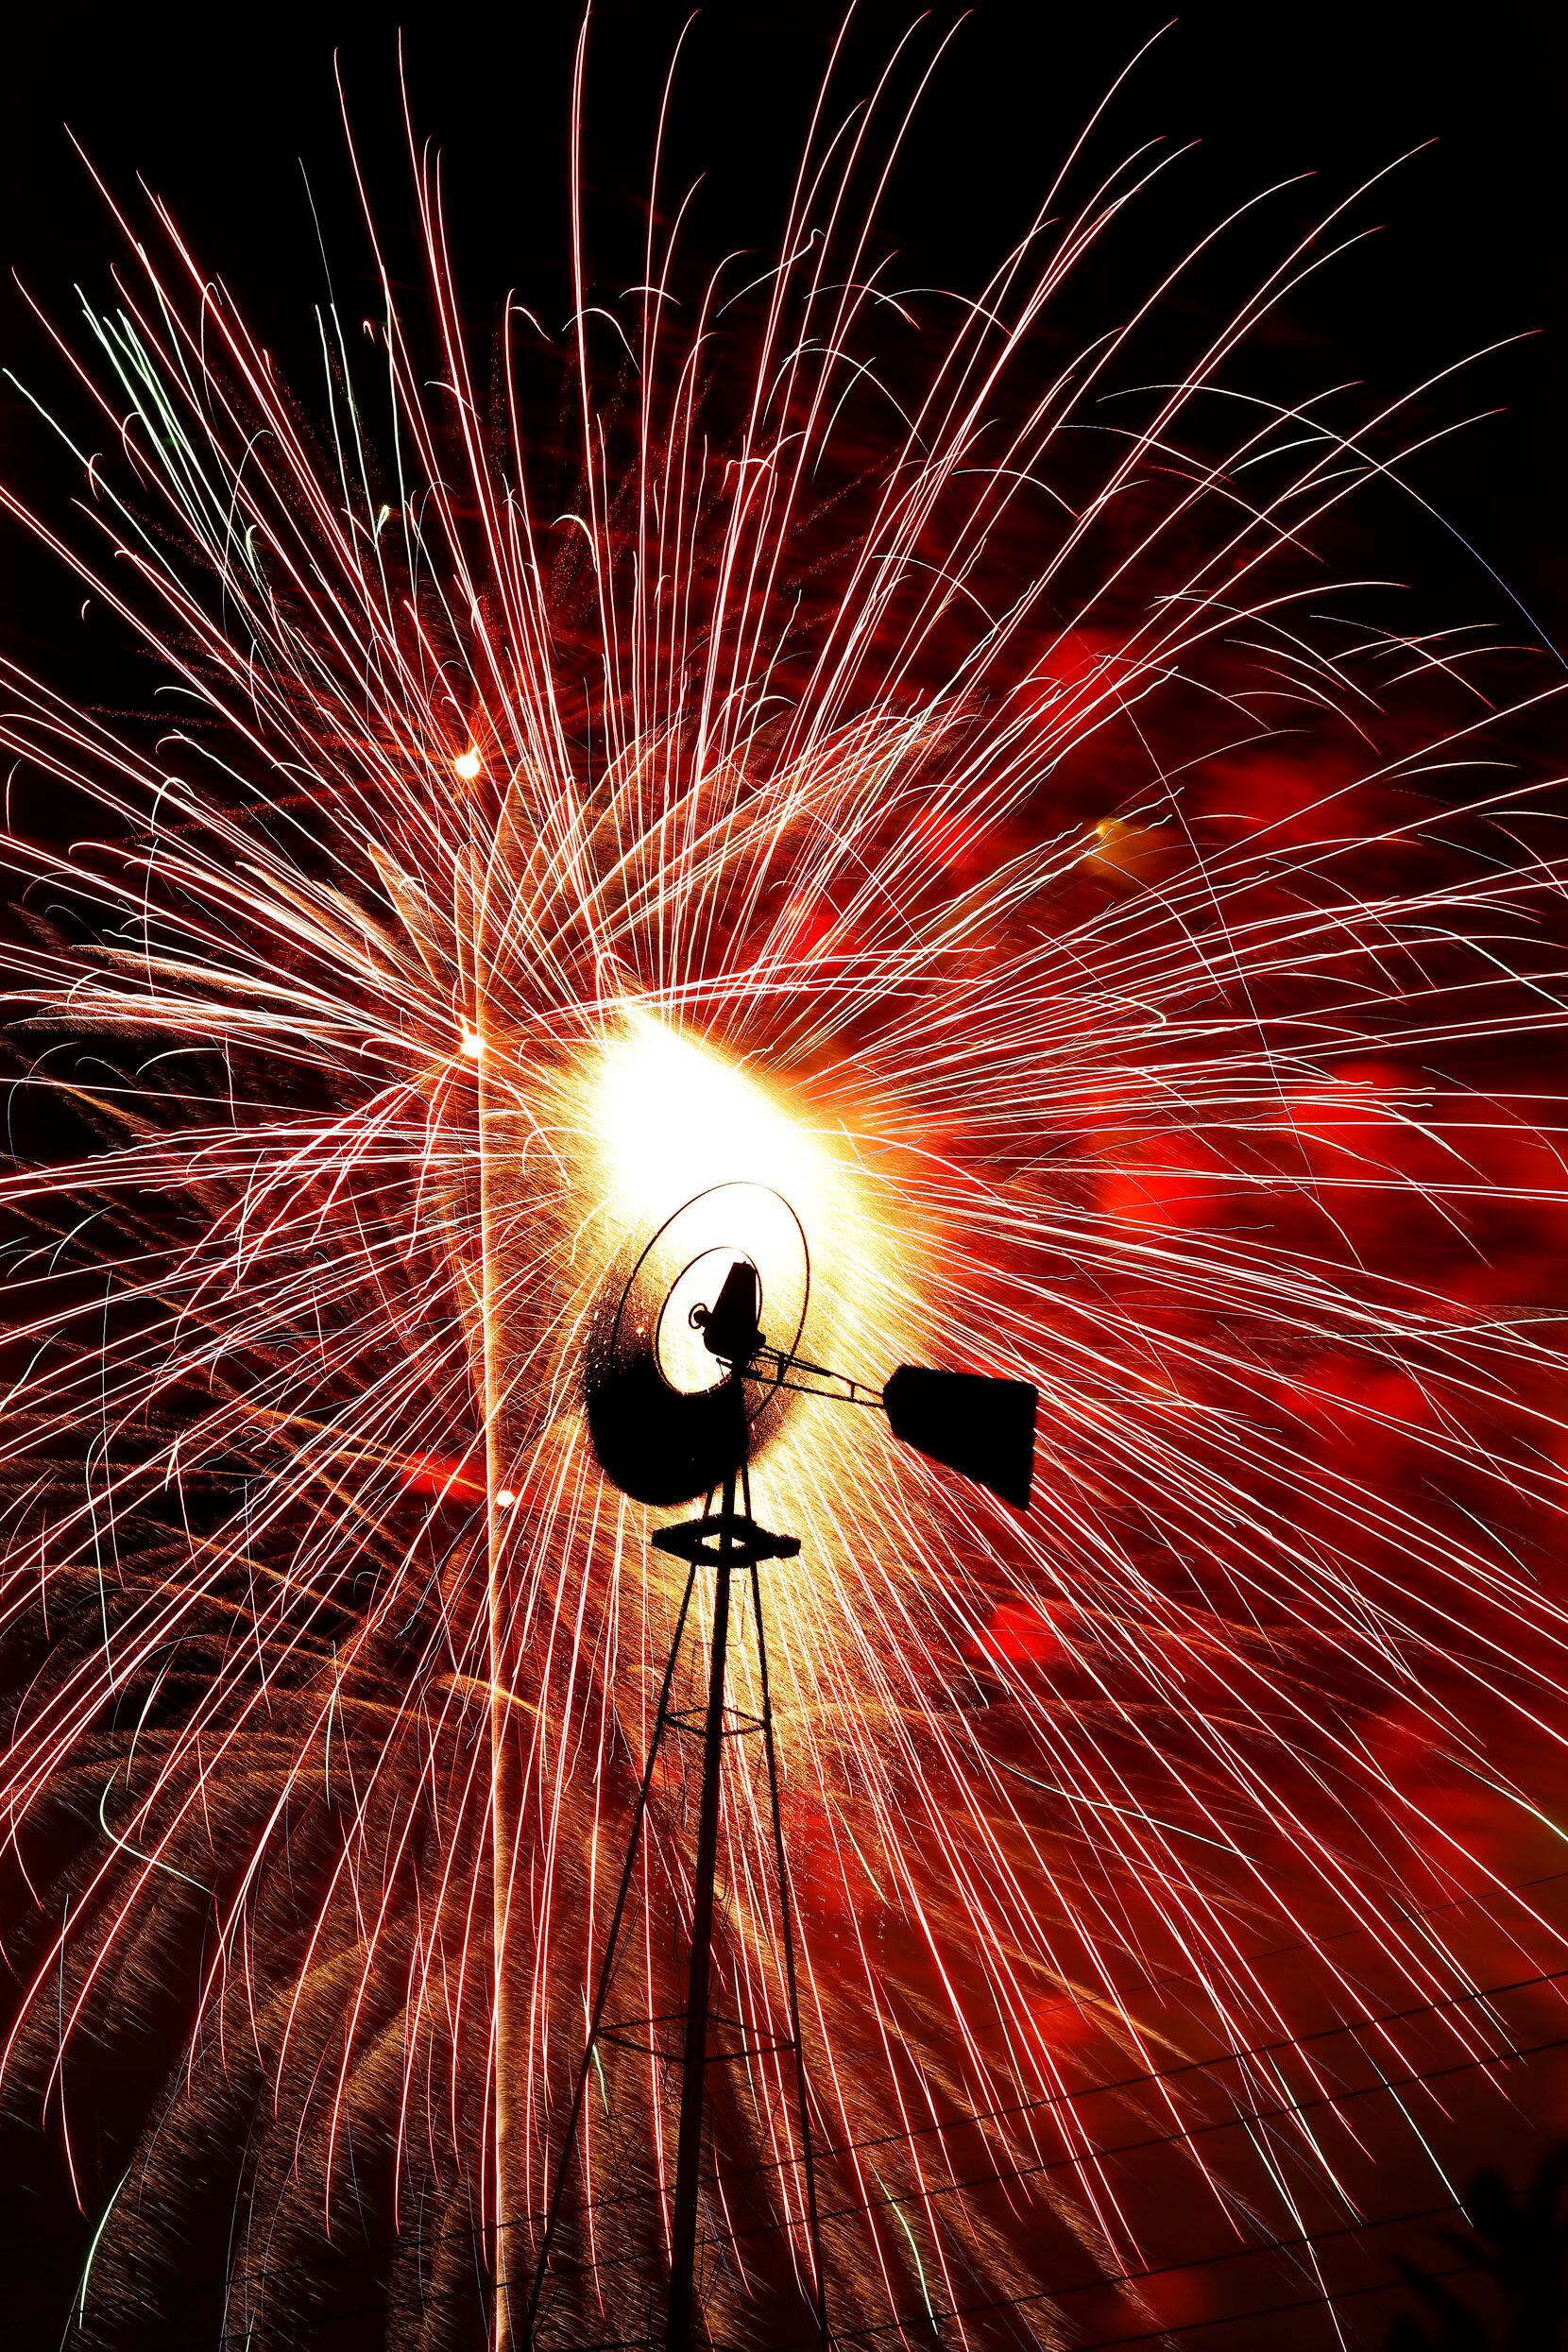 Fireworks exploded over a spinning windmill on July 3 at Addison’s Kaboom Town festival. Freedom had added meaning in North Texas as health experts said those who had been fully vaccinated could gather more safely. In 2021, the Fourth of July marked the return of neighborhood parades, softball games and more.